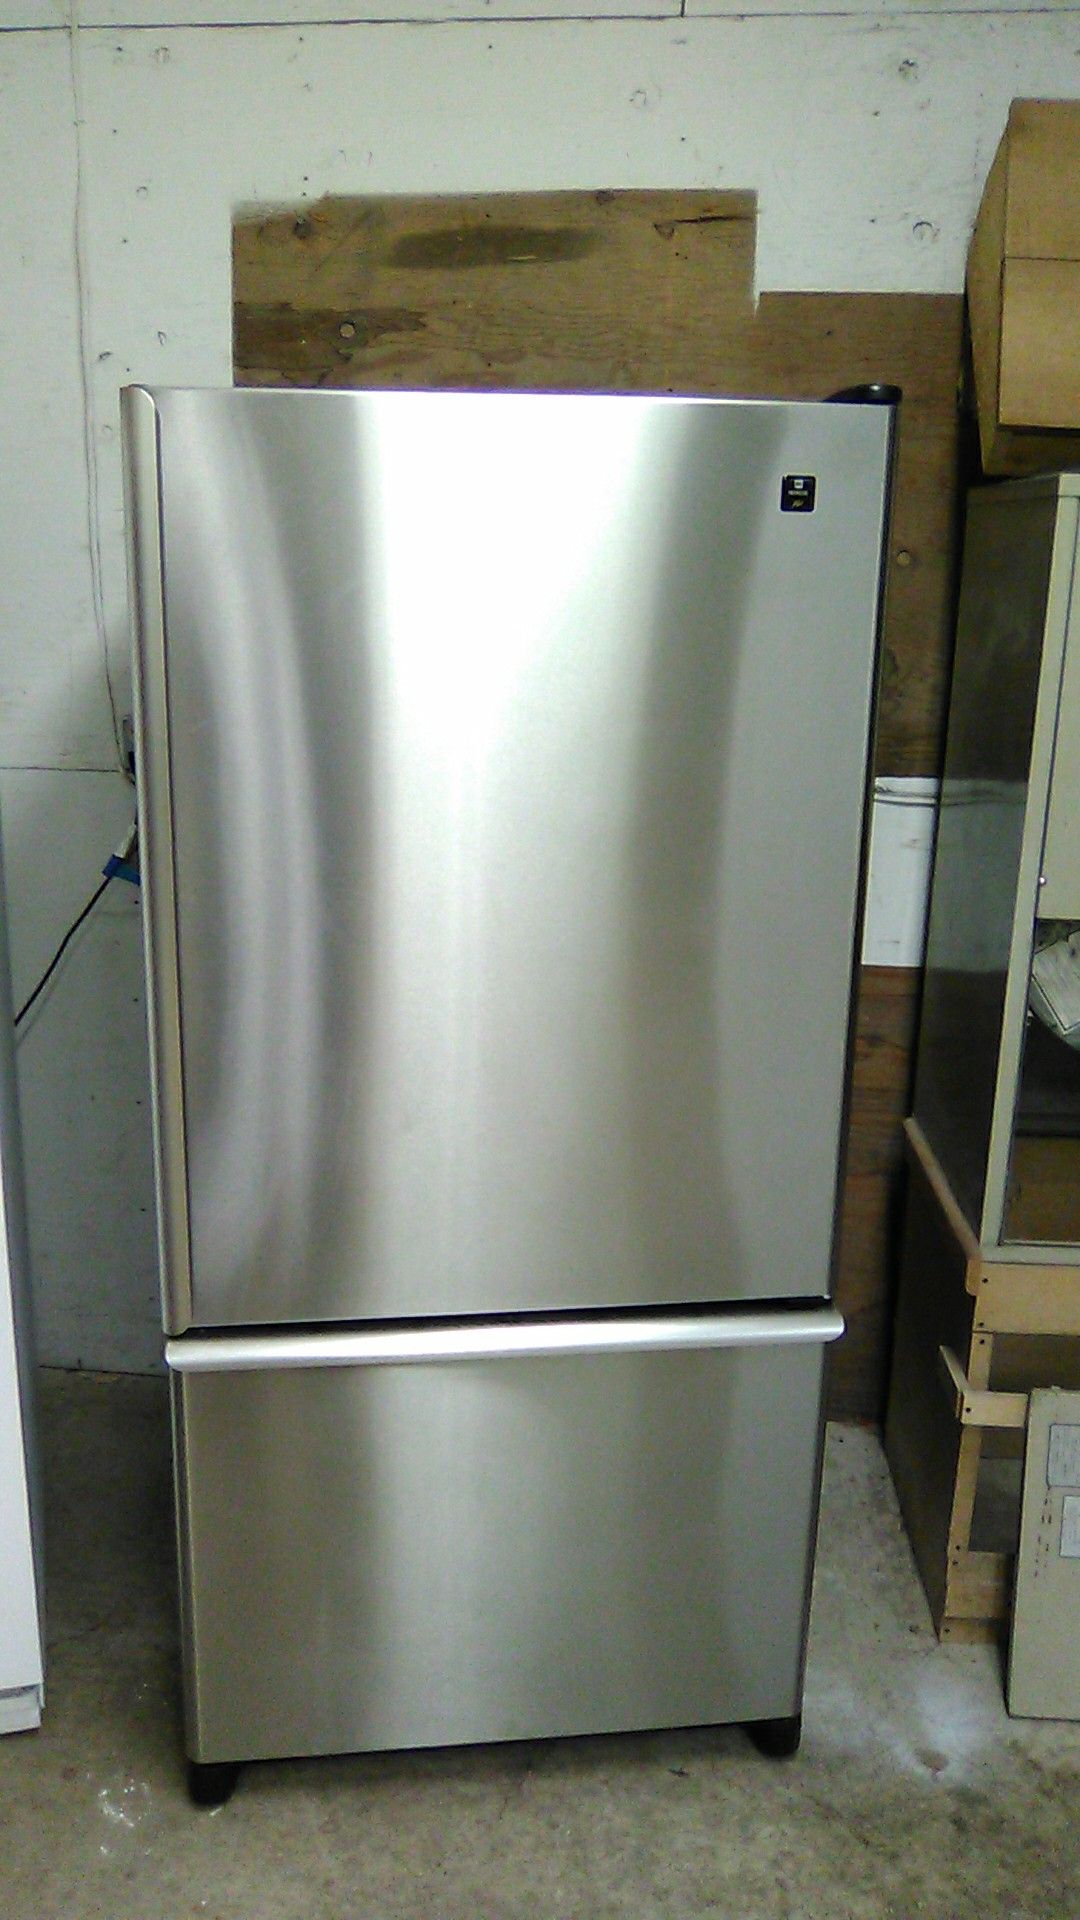 18 cubic foot stainless steel bottom freezer pull out Maytag